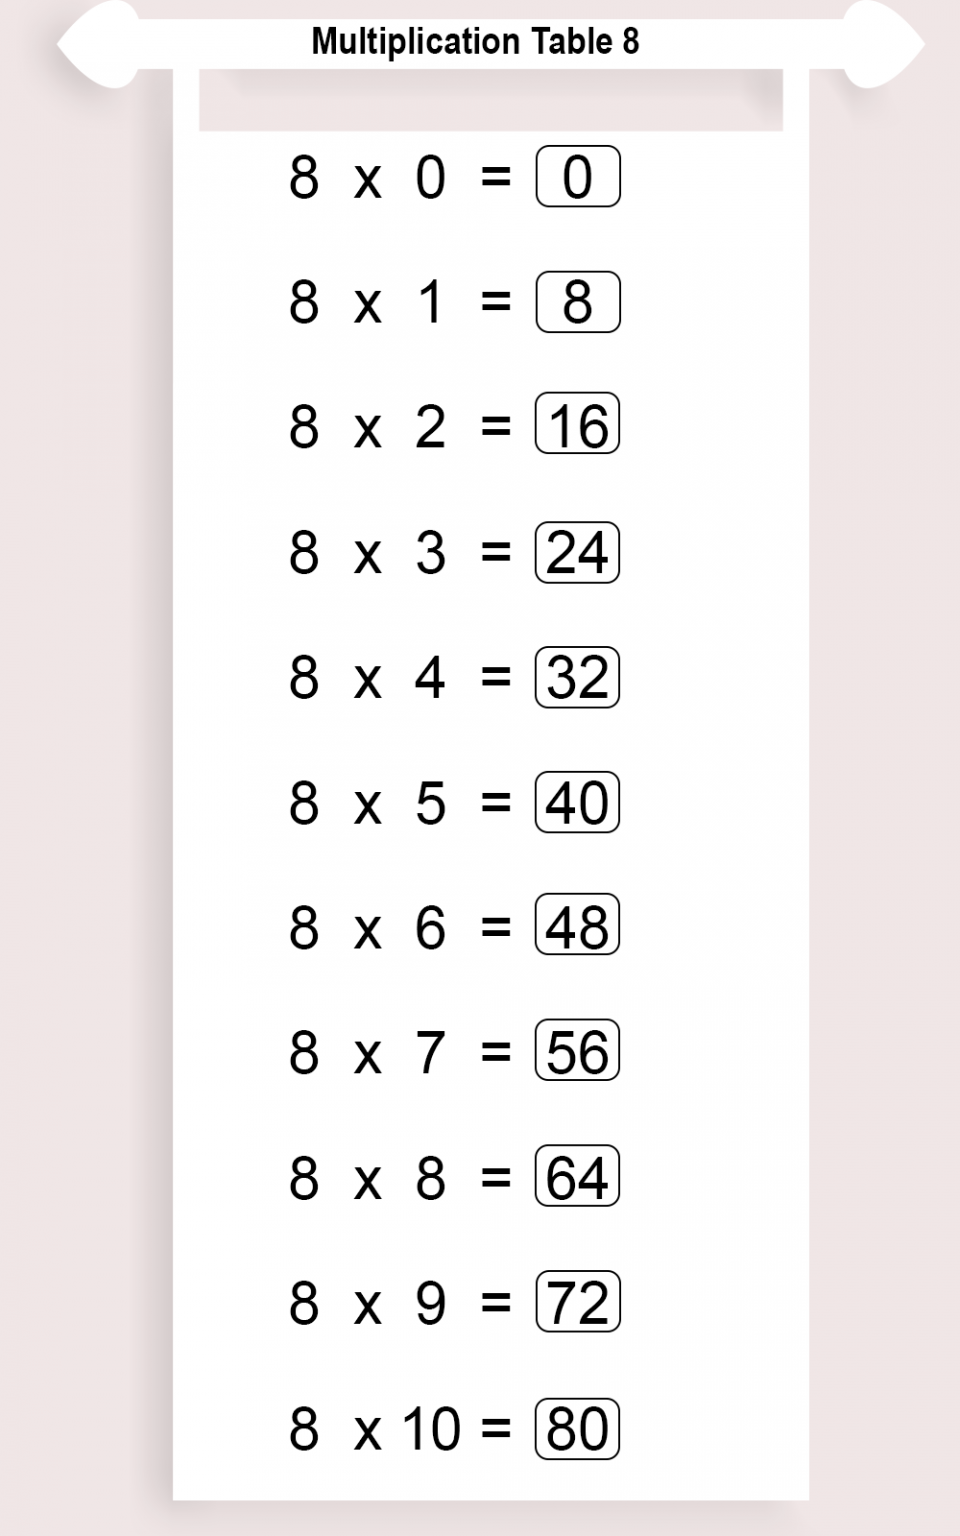 times-table-8-multiplication-table